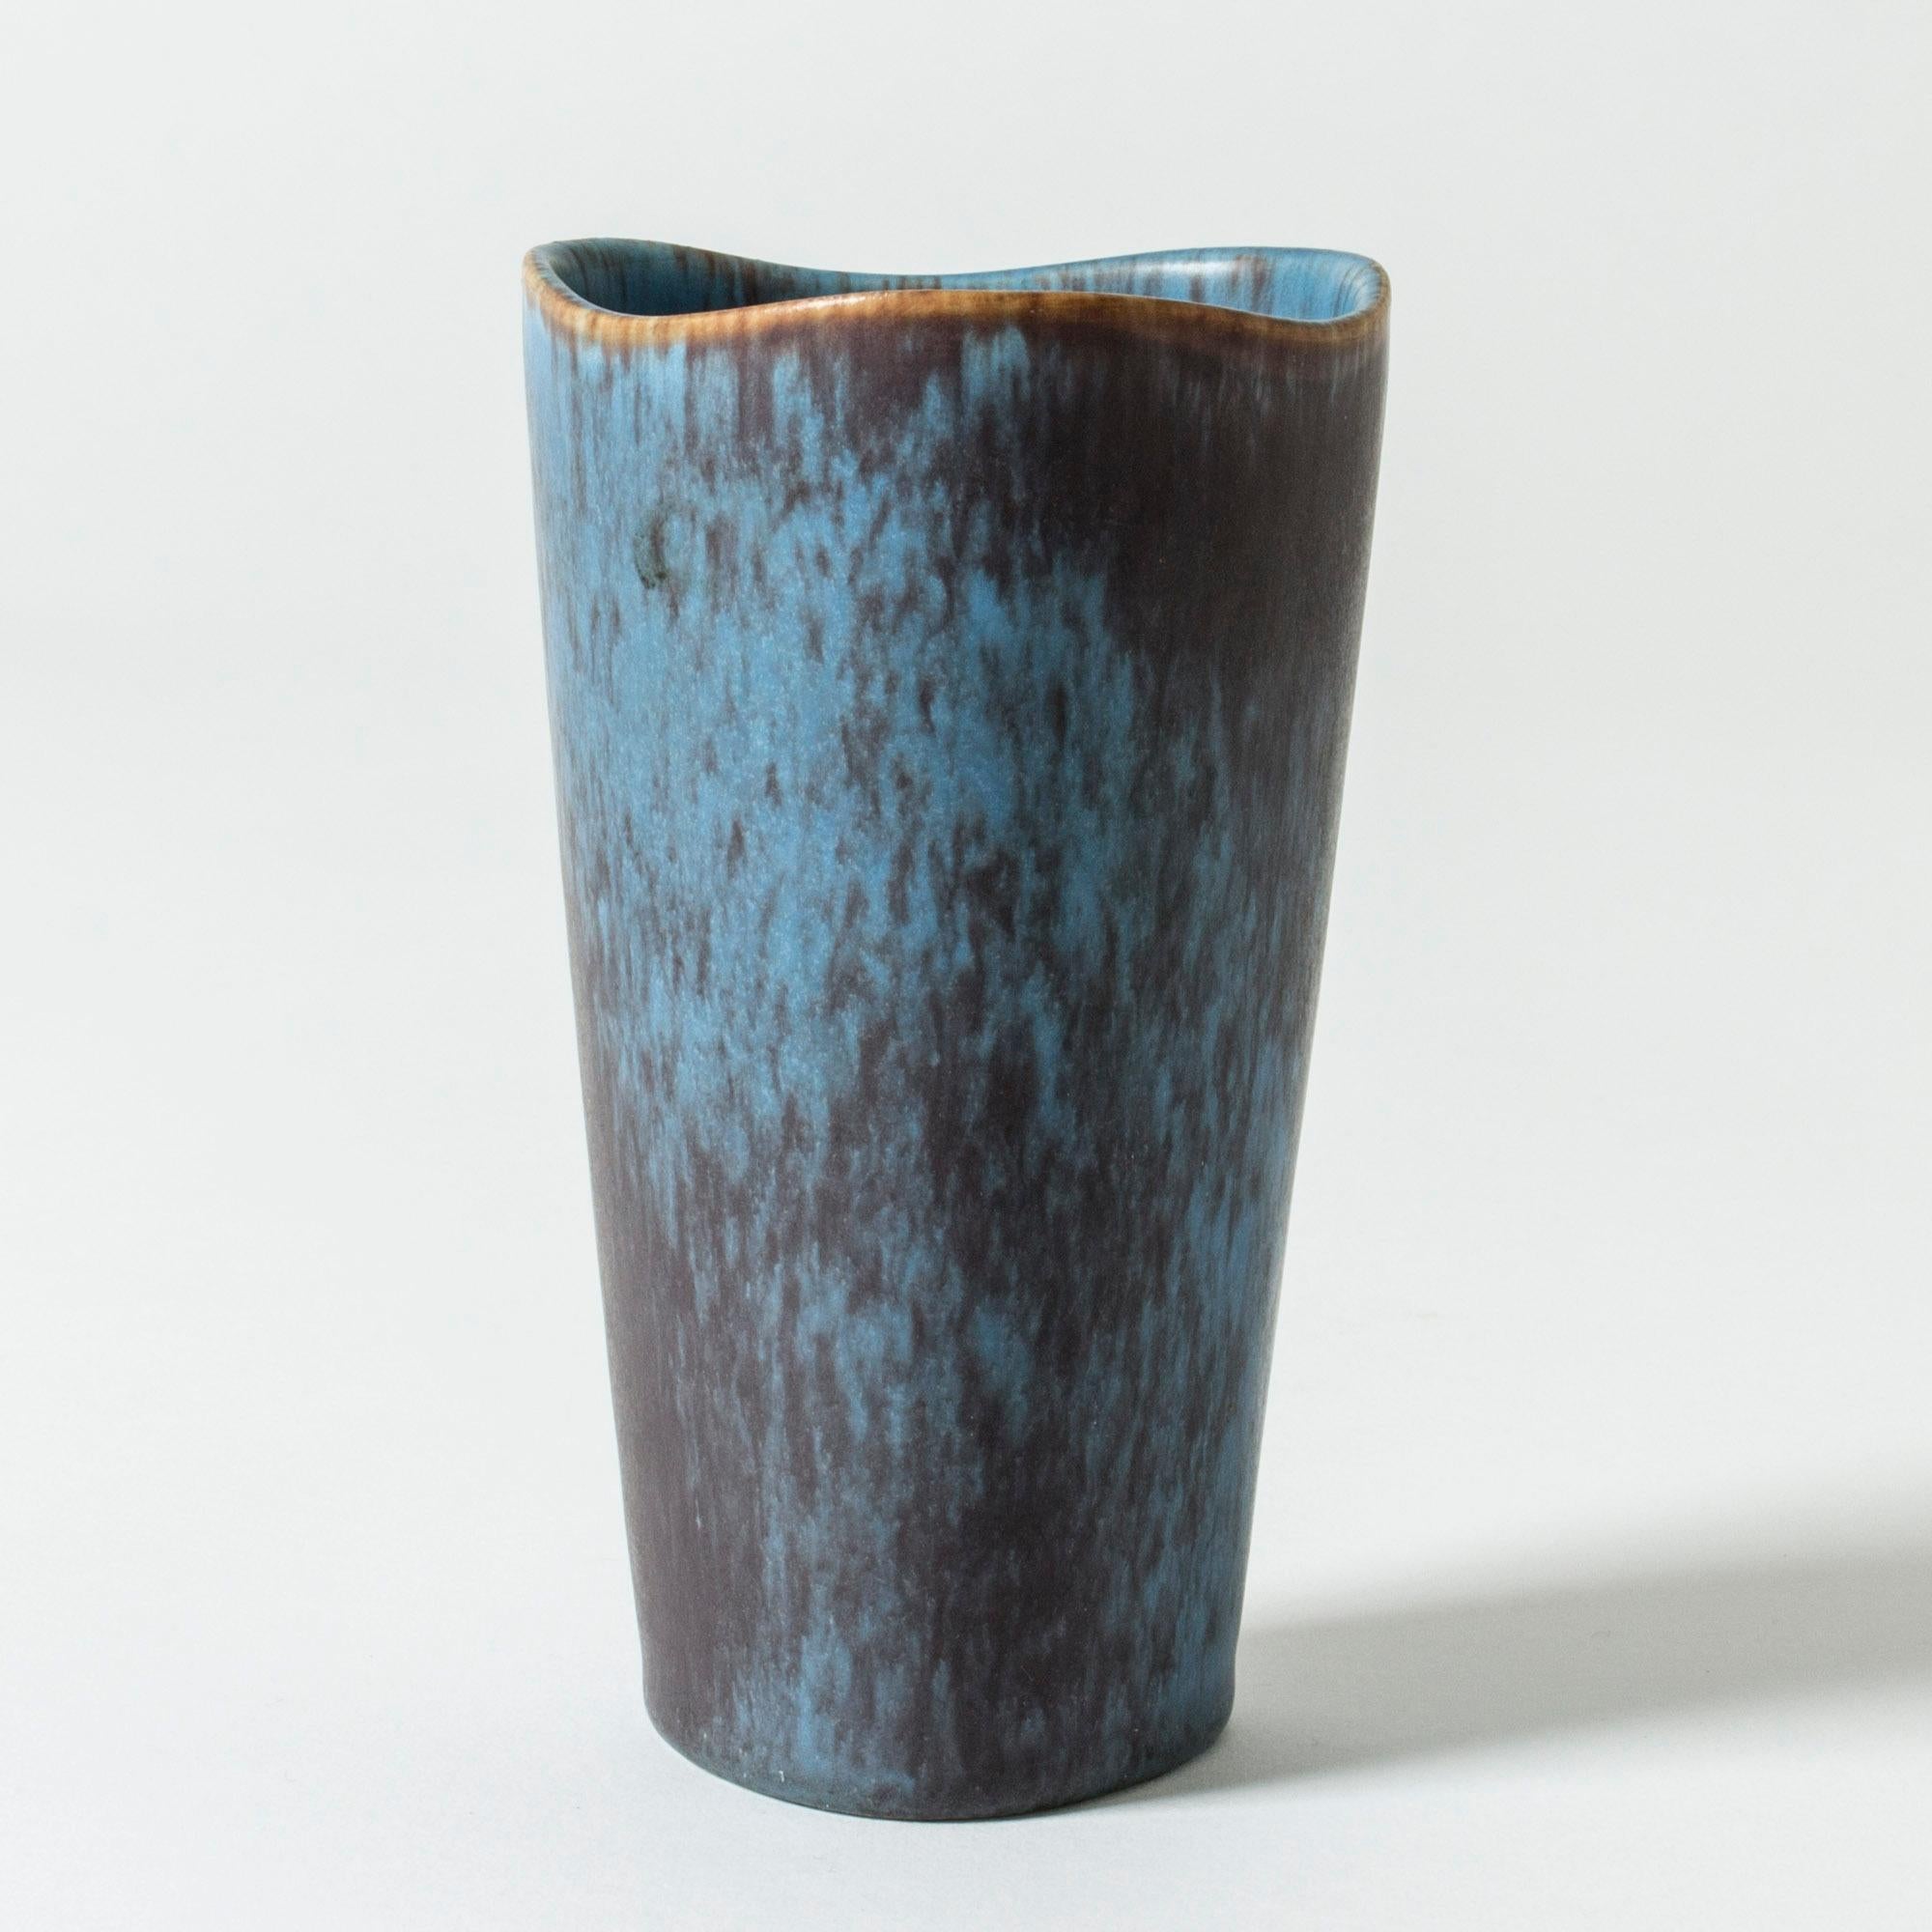 Stoneware vase in a clean form by Gunnar Nylund, the undulating rim softens the form. Vivacious blue glaze with purple streaks.

Gunnar Nylund was one of the most influential ceramicists and designers of the Swedish mid-century period. He was